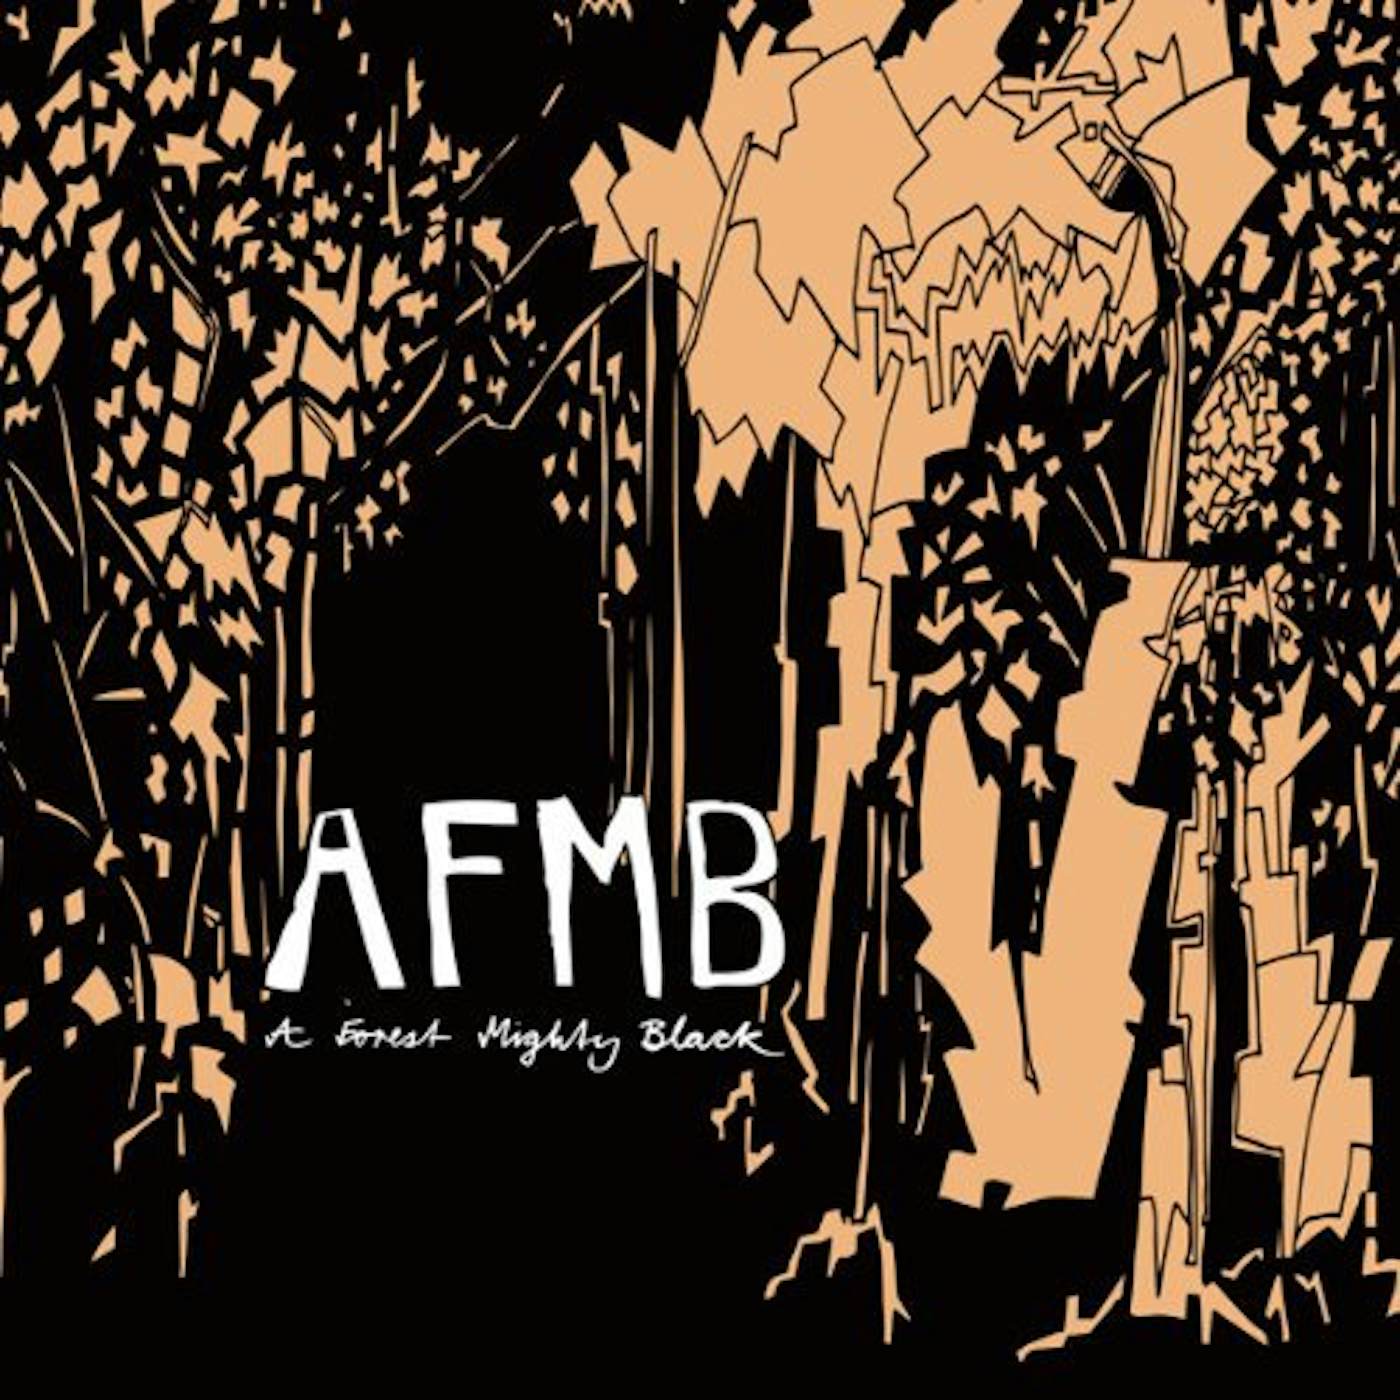 AFMB FOREST MIGHTY BLACK Vinyl Record